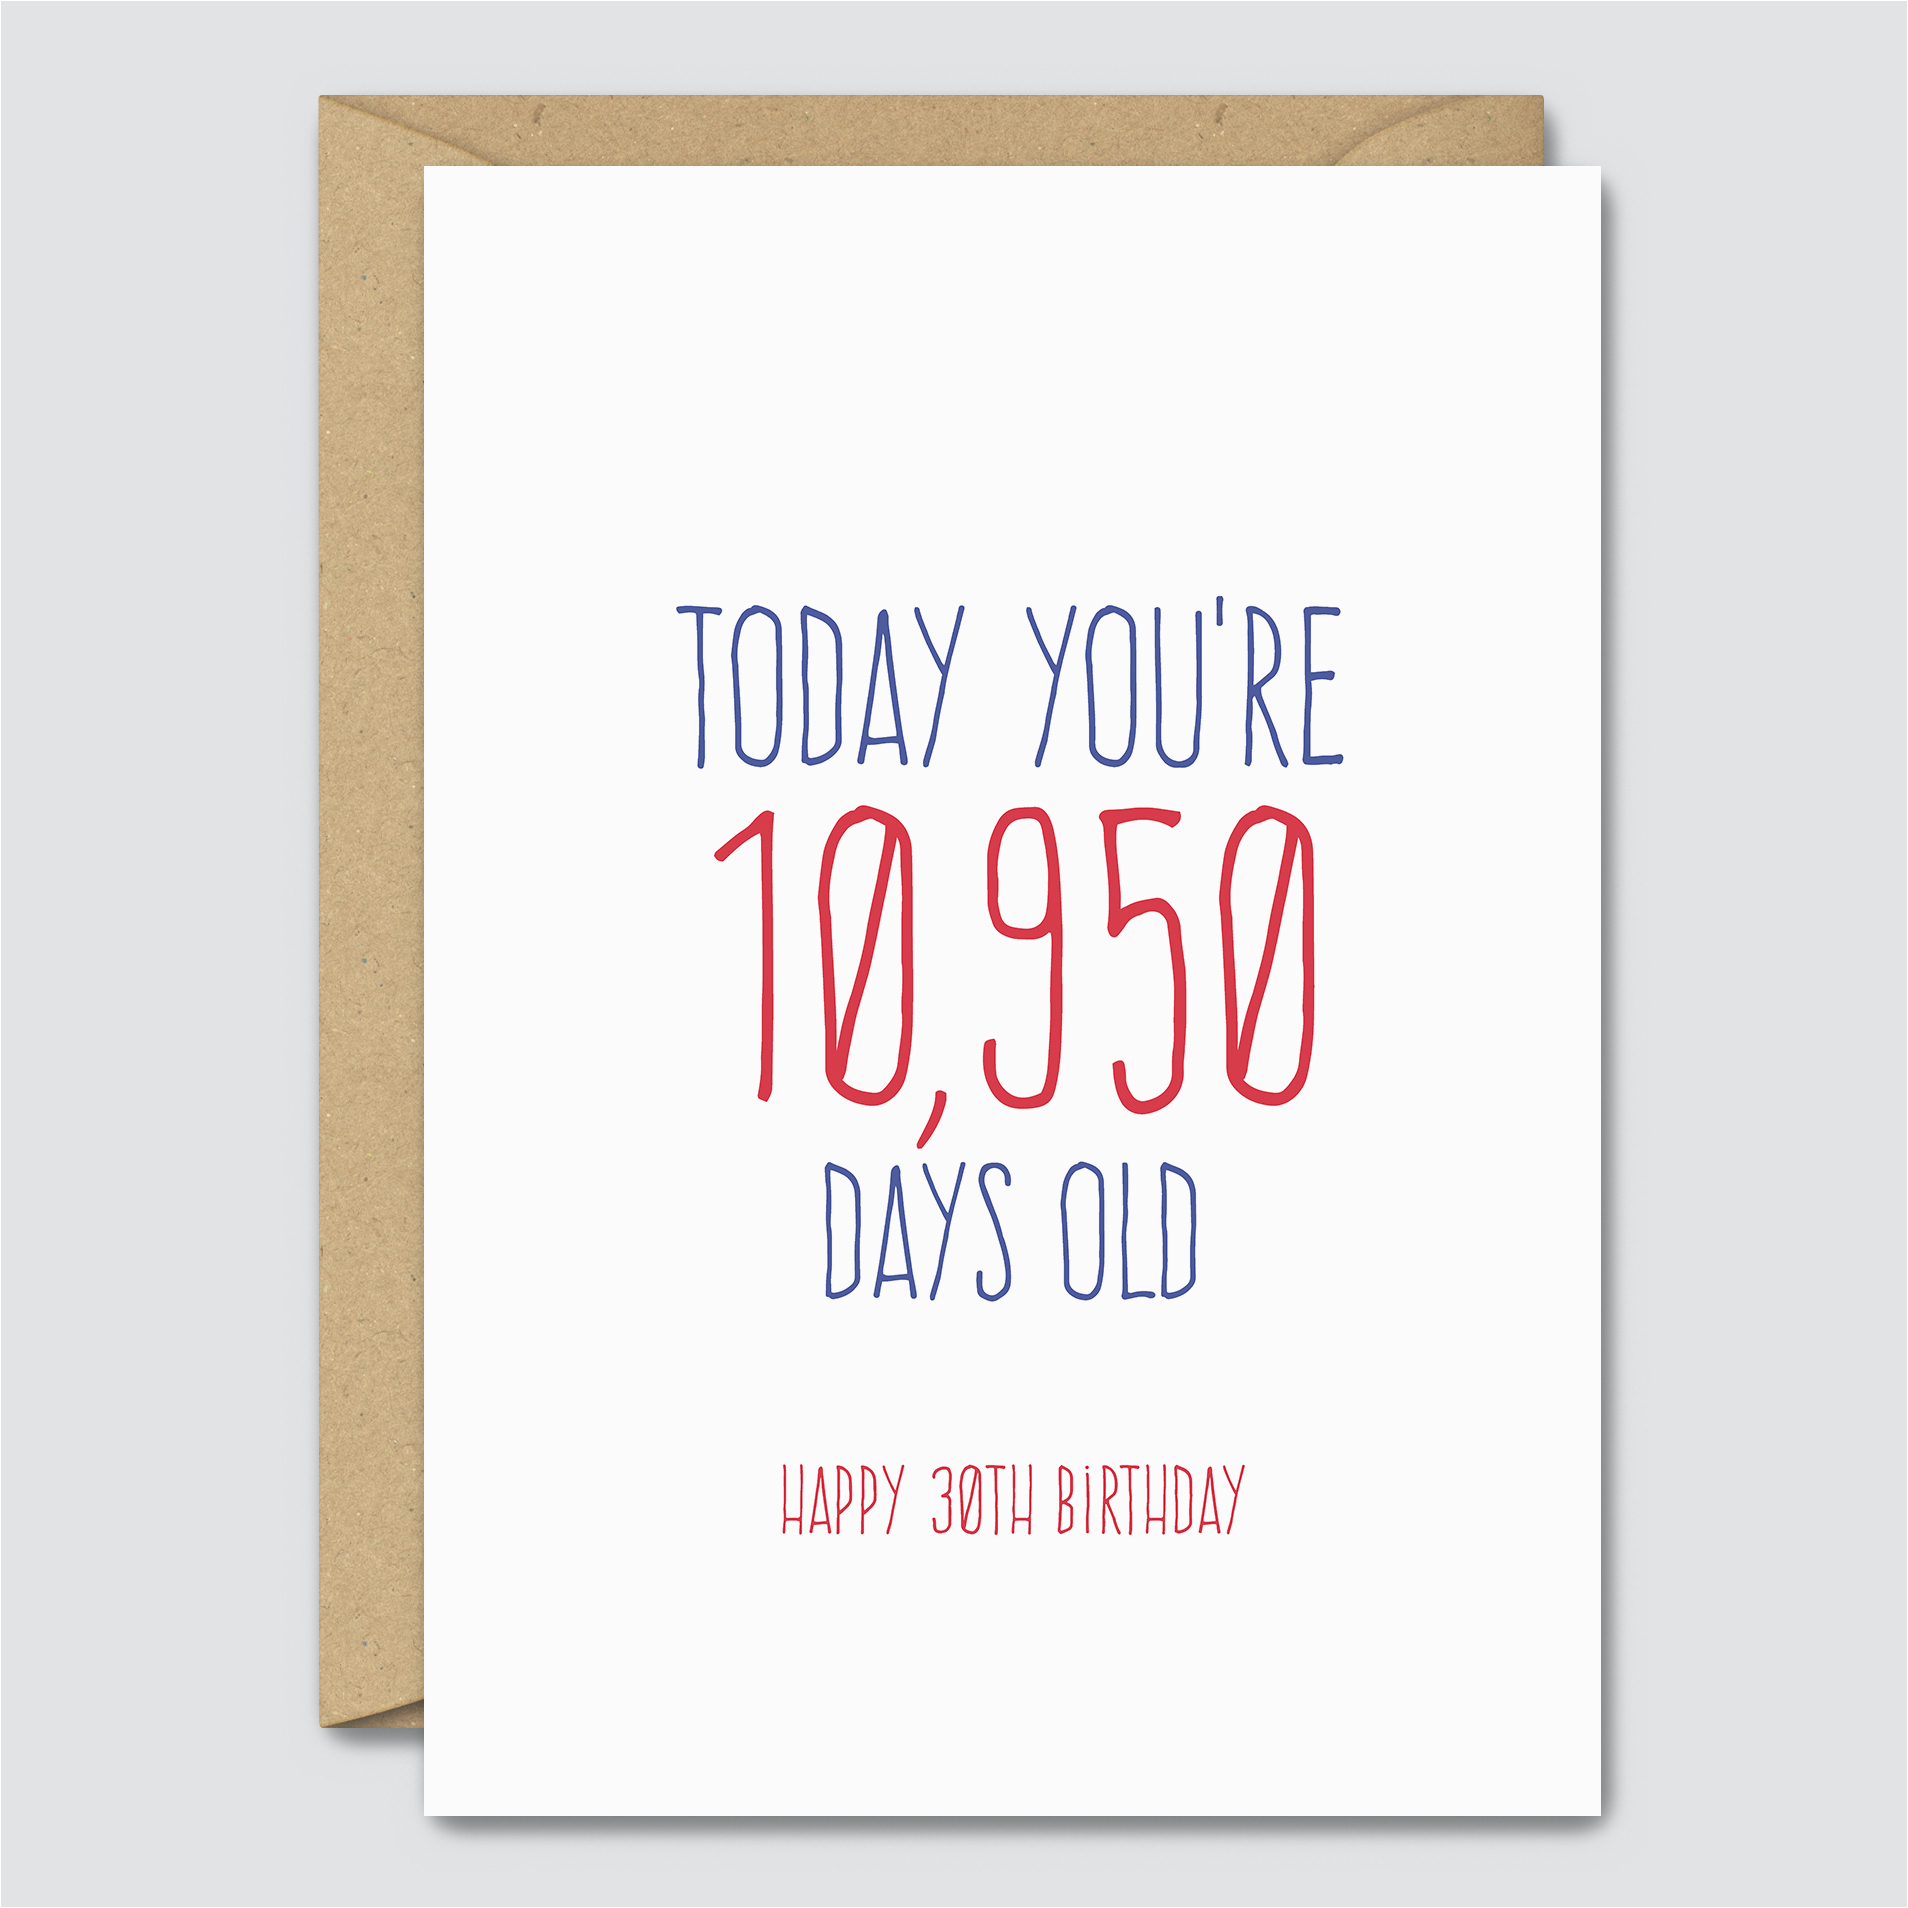 Funny 30th Birthday Card Messages - Printable Templates Free